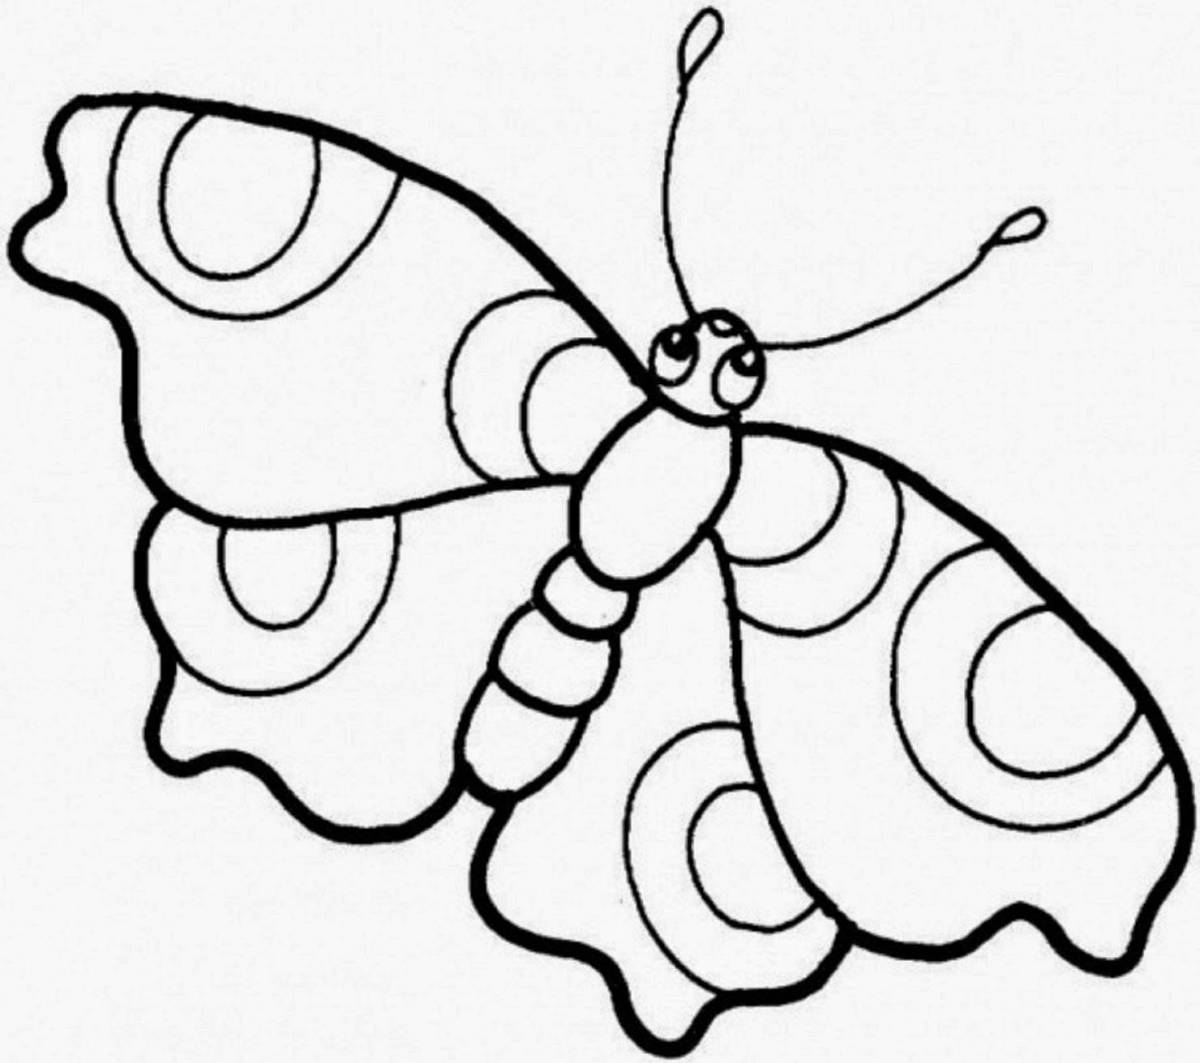 Great butterfly coloring book for 3-4 year olds